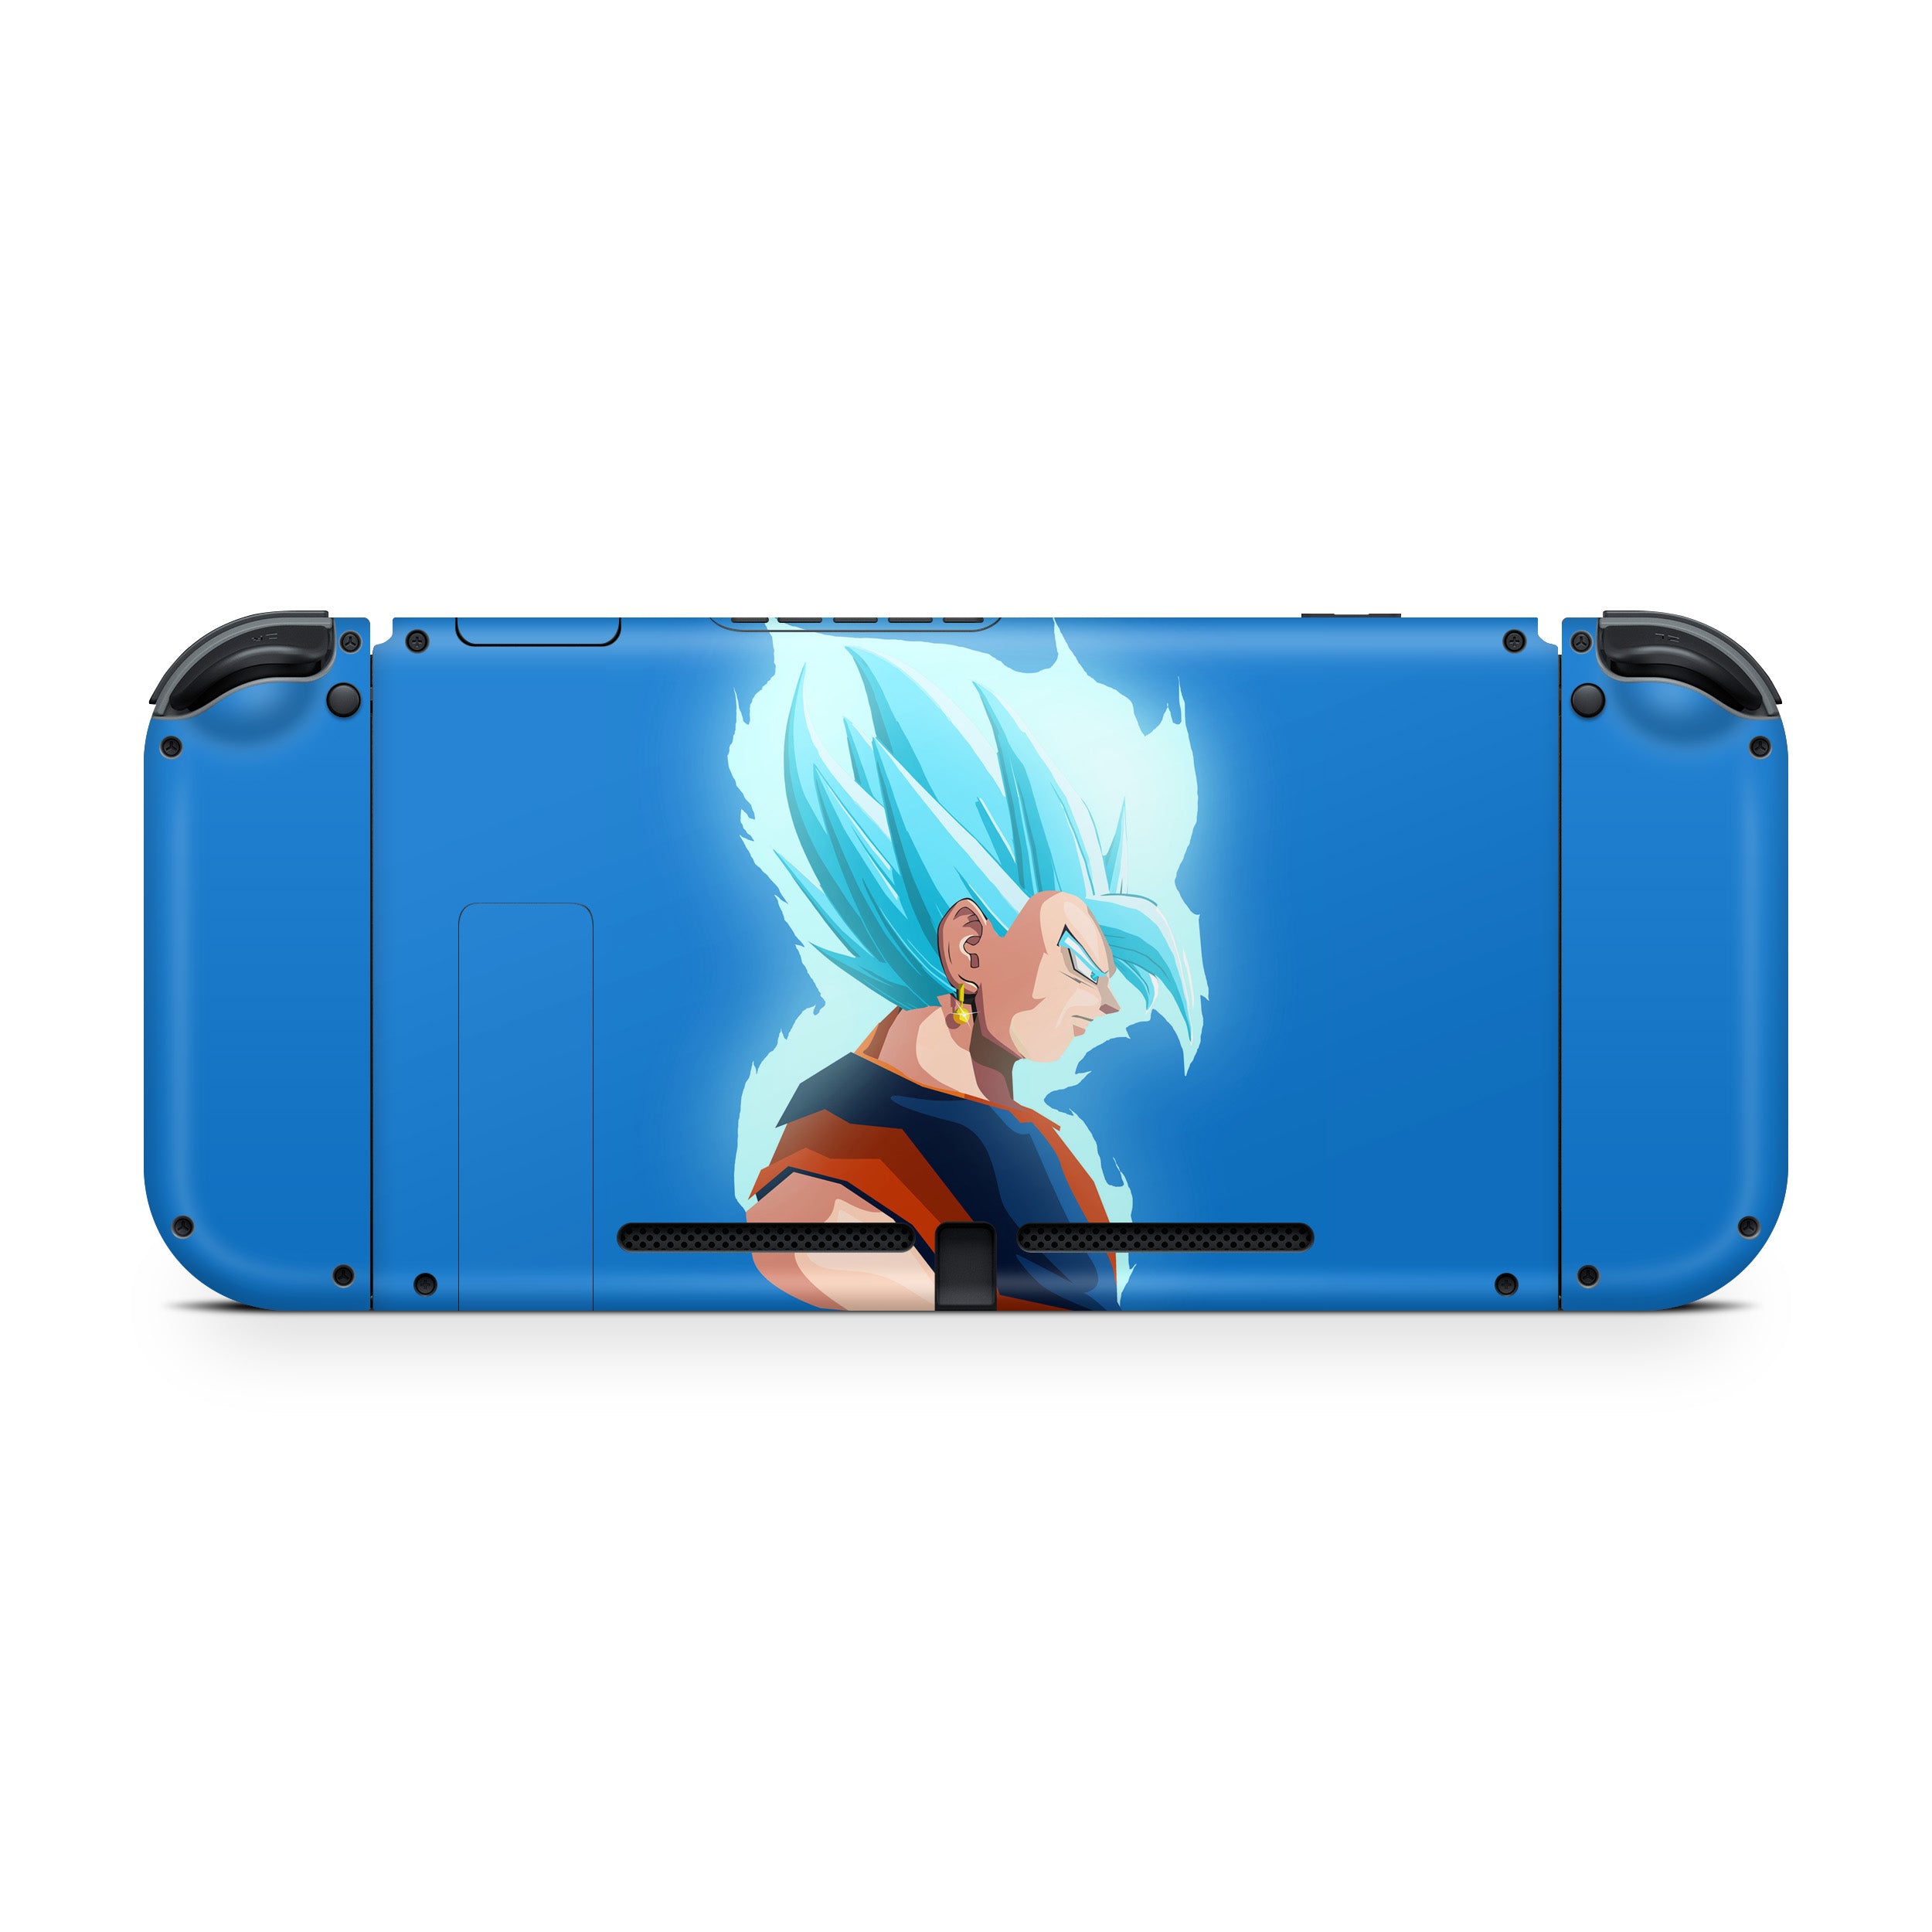 A video game skin featuring a Dragon Ball Super Vegito design for the Nintendo Switch.